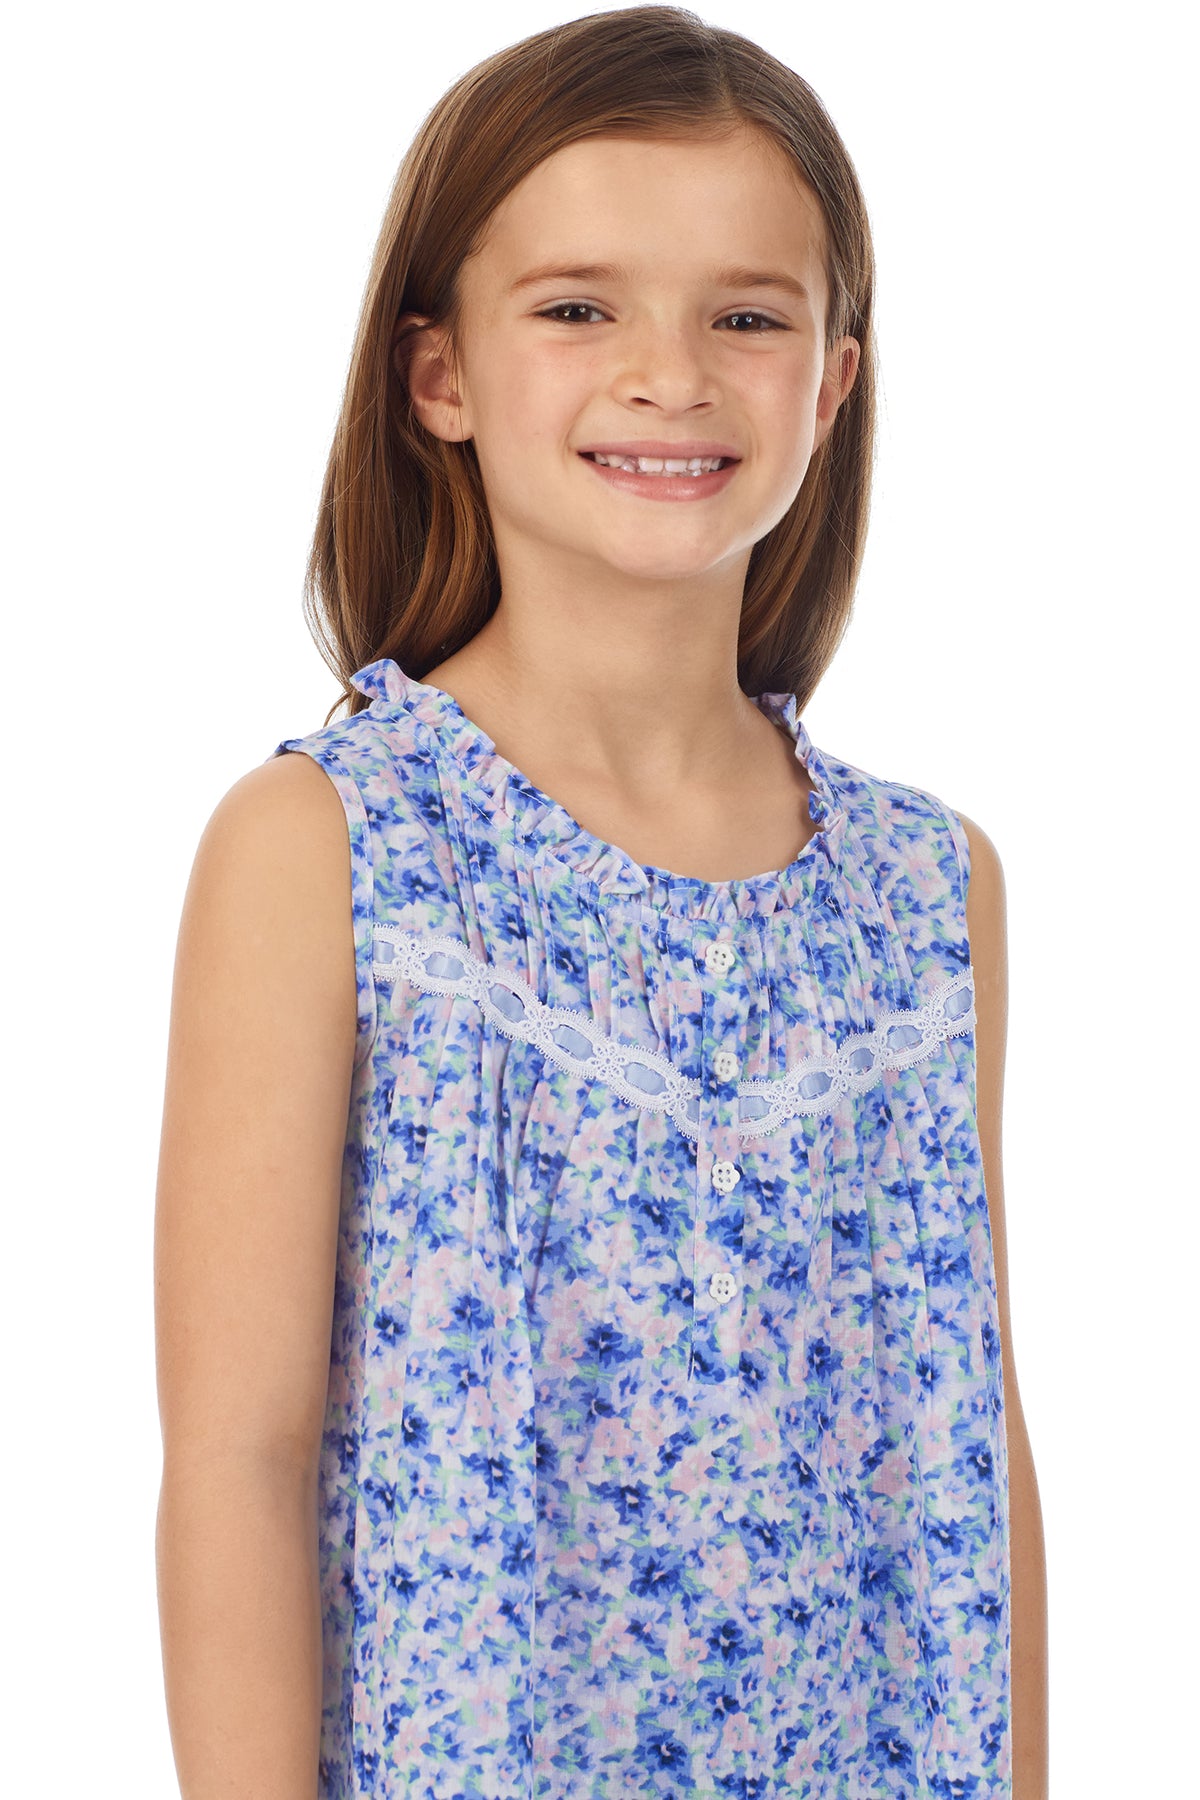 A girl wearing a sleeveless nightgown with blue floral pattern.